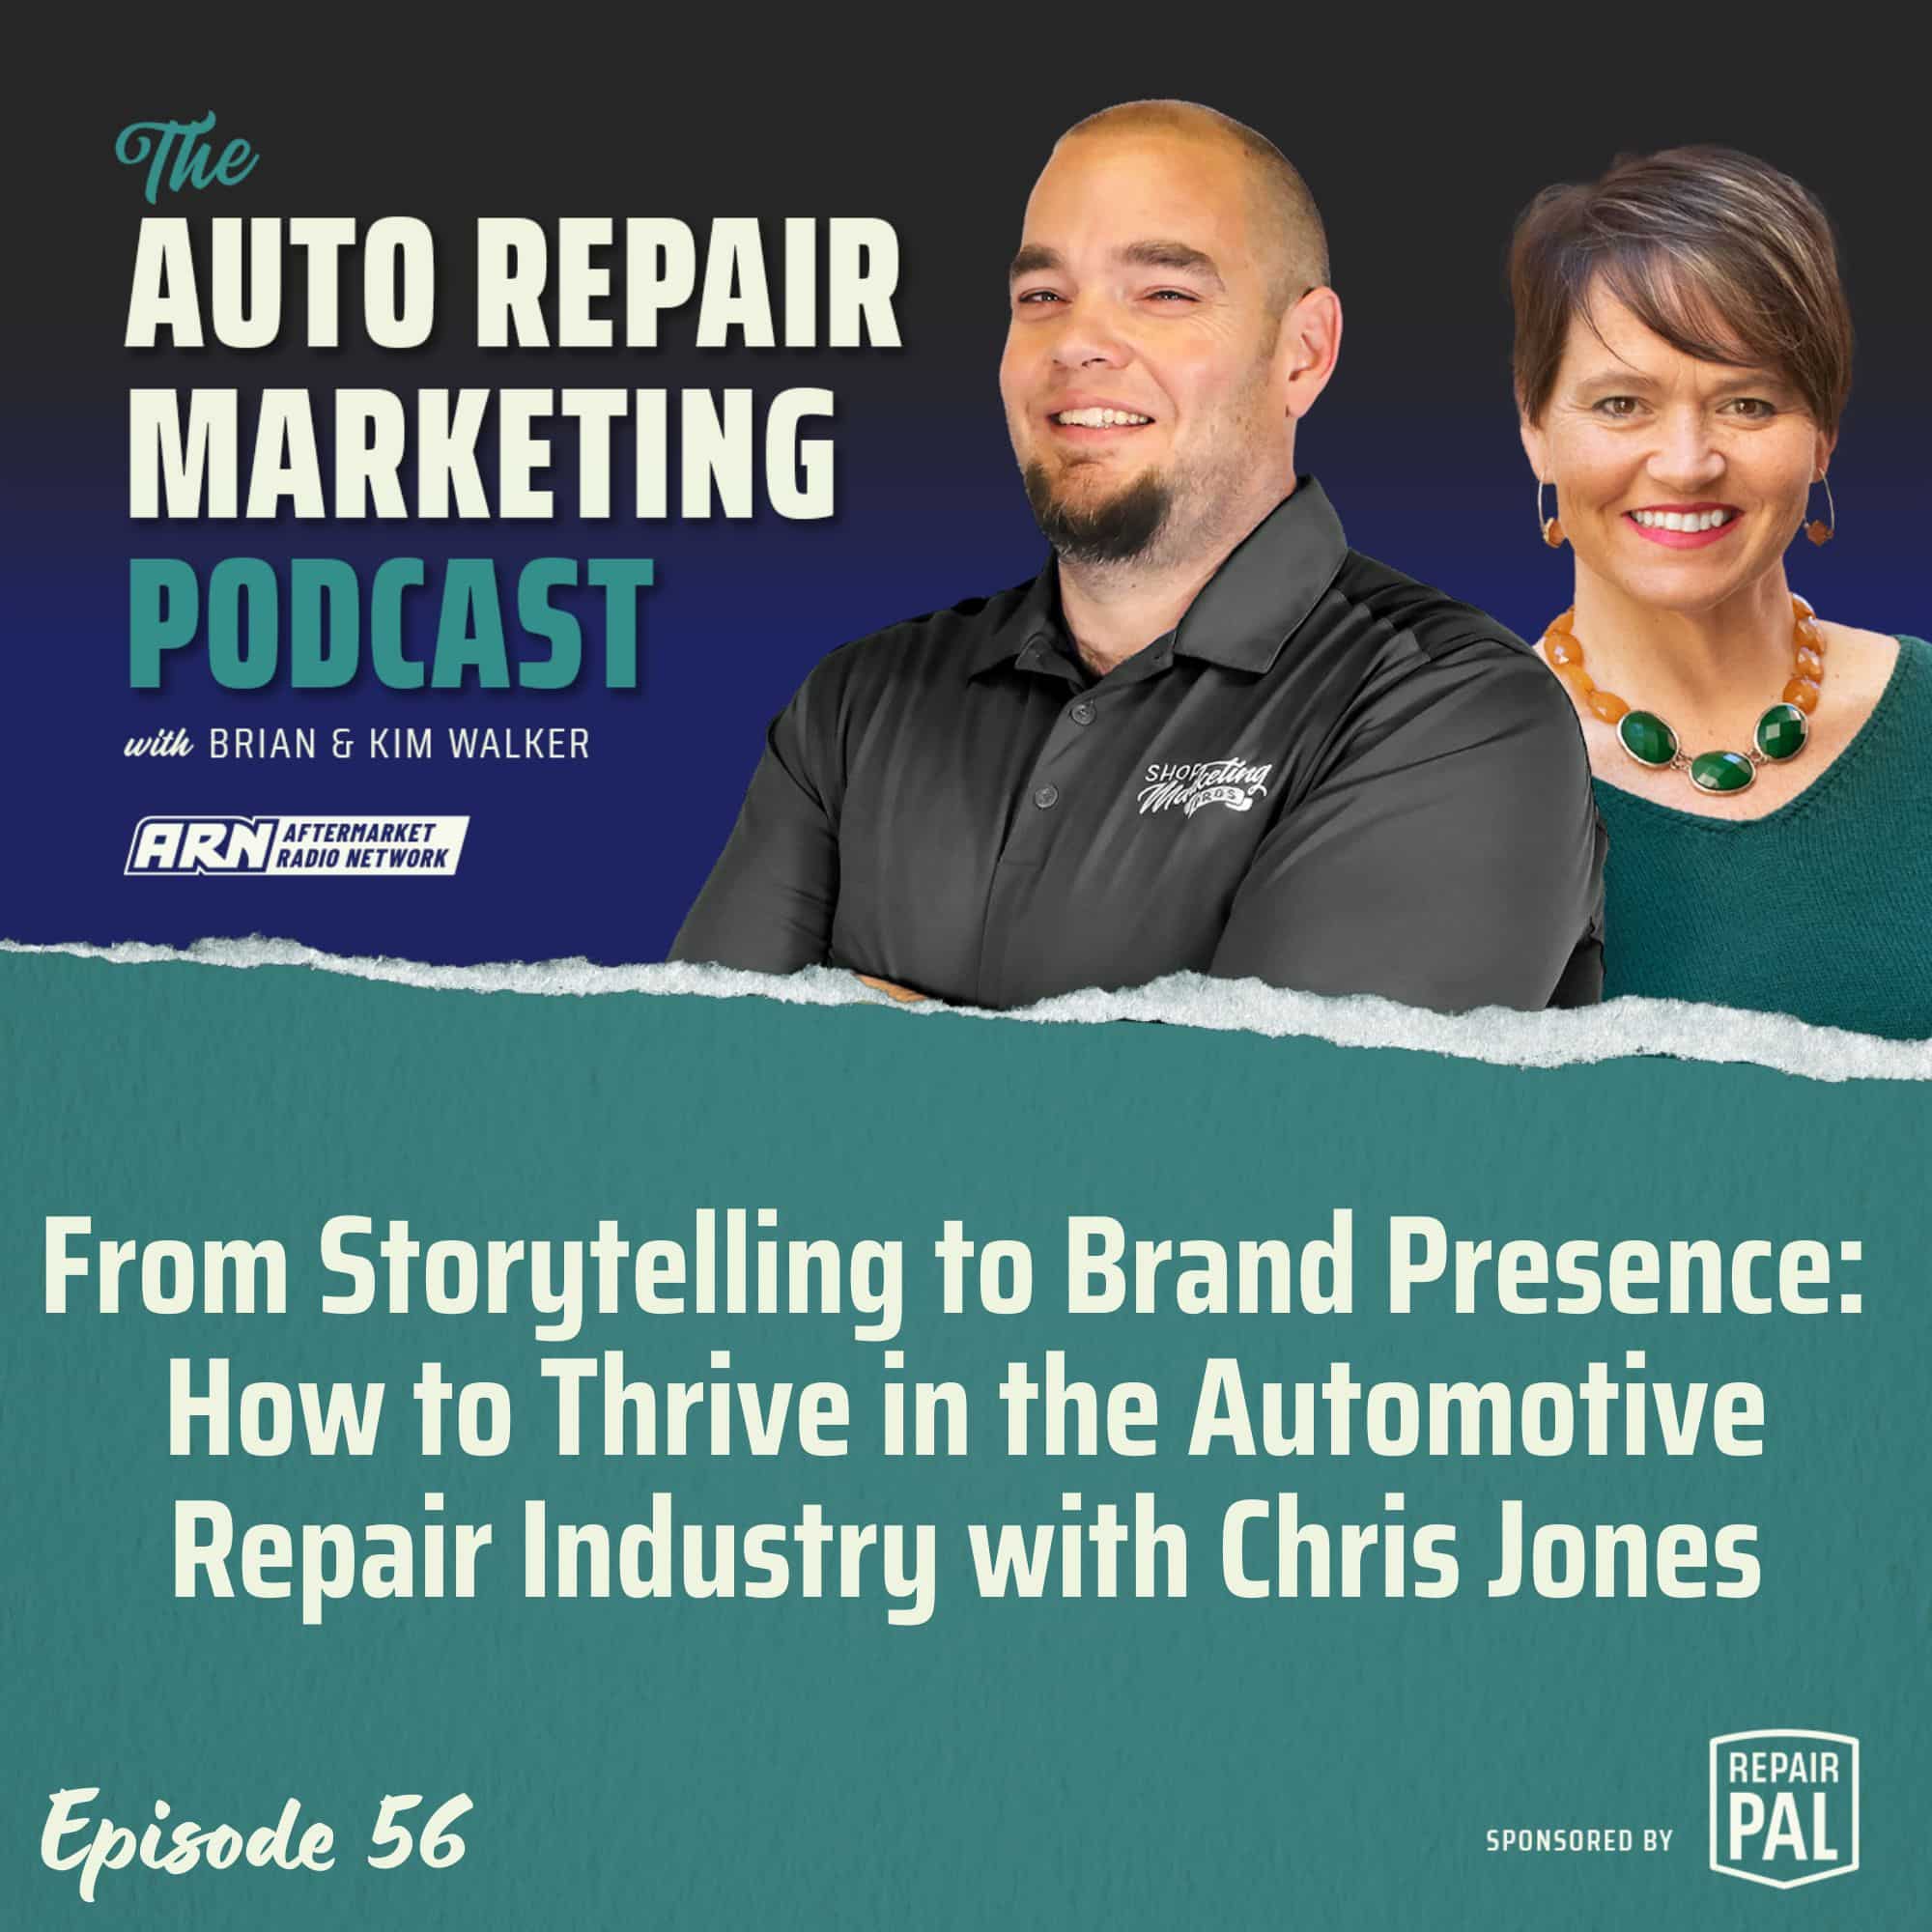 The Auto Repair Marketing Podcast Episode 56. Brian & Kim Walker talking about the topic "From Storytelling to Brand Presence: How to Thrive in the Automotive Repair Industry with Chris Jones". Sponsored by Repair Pal.